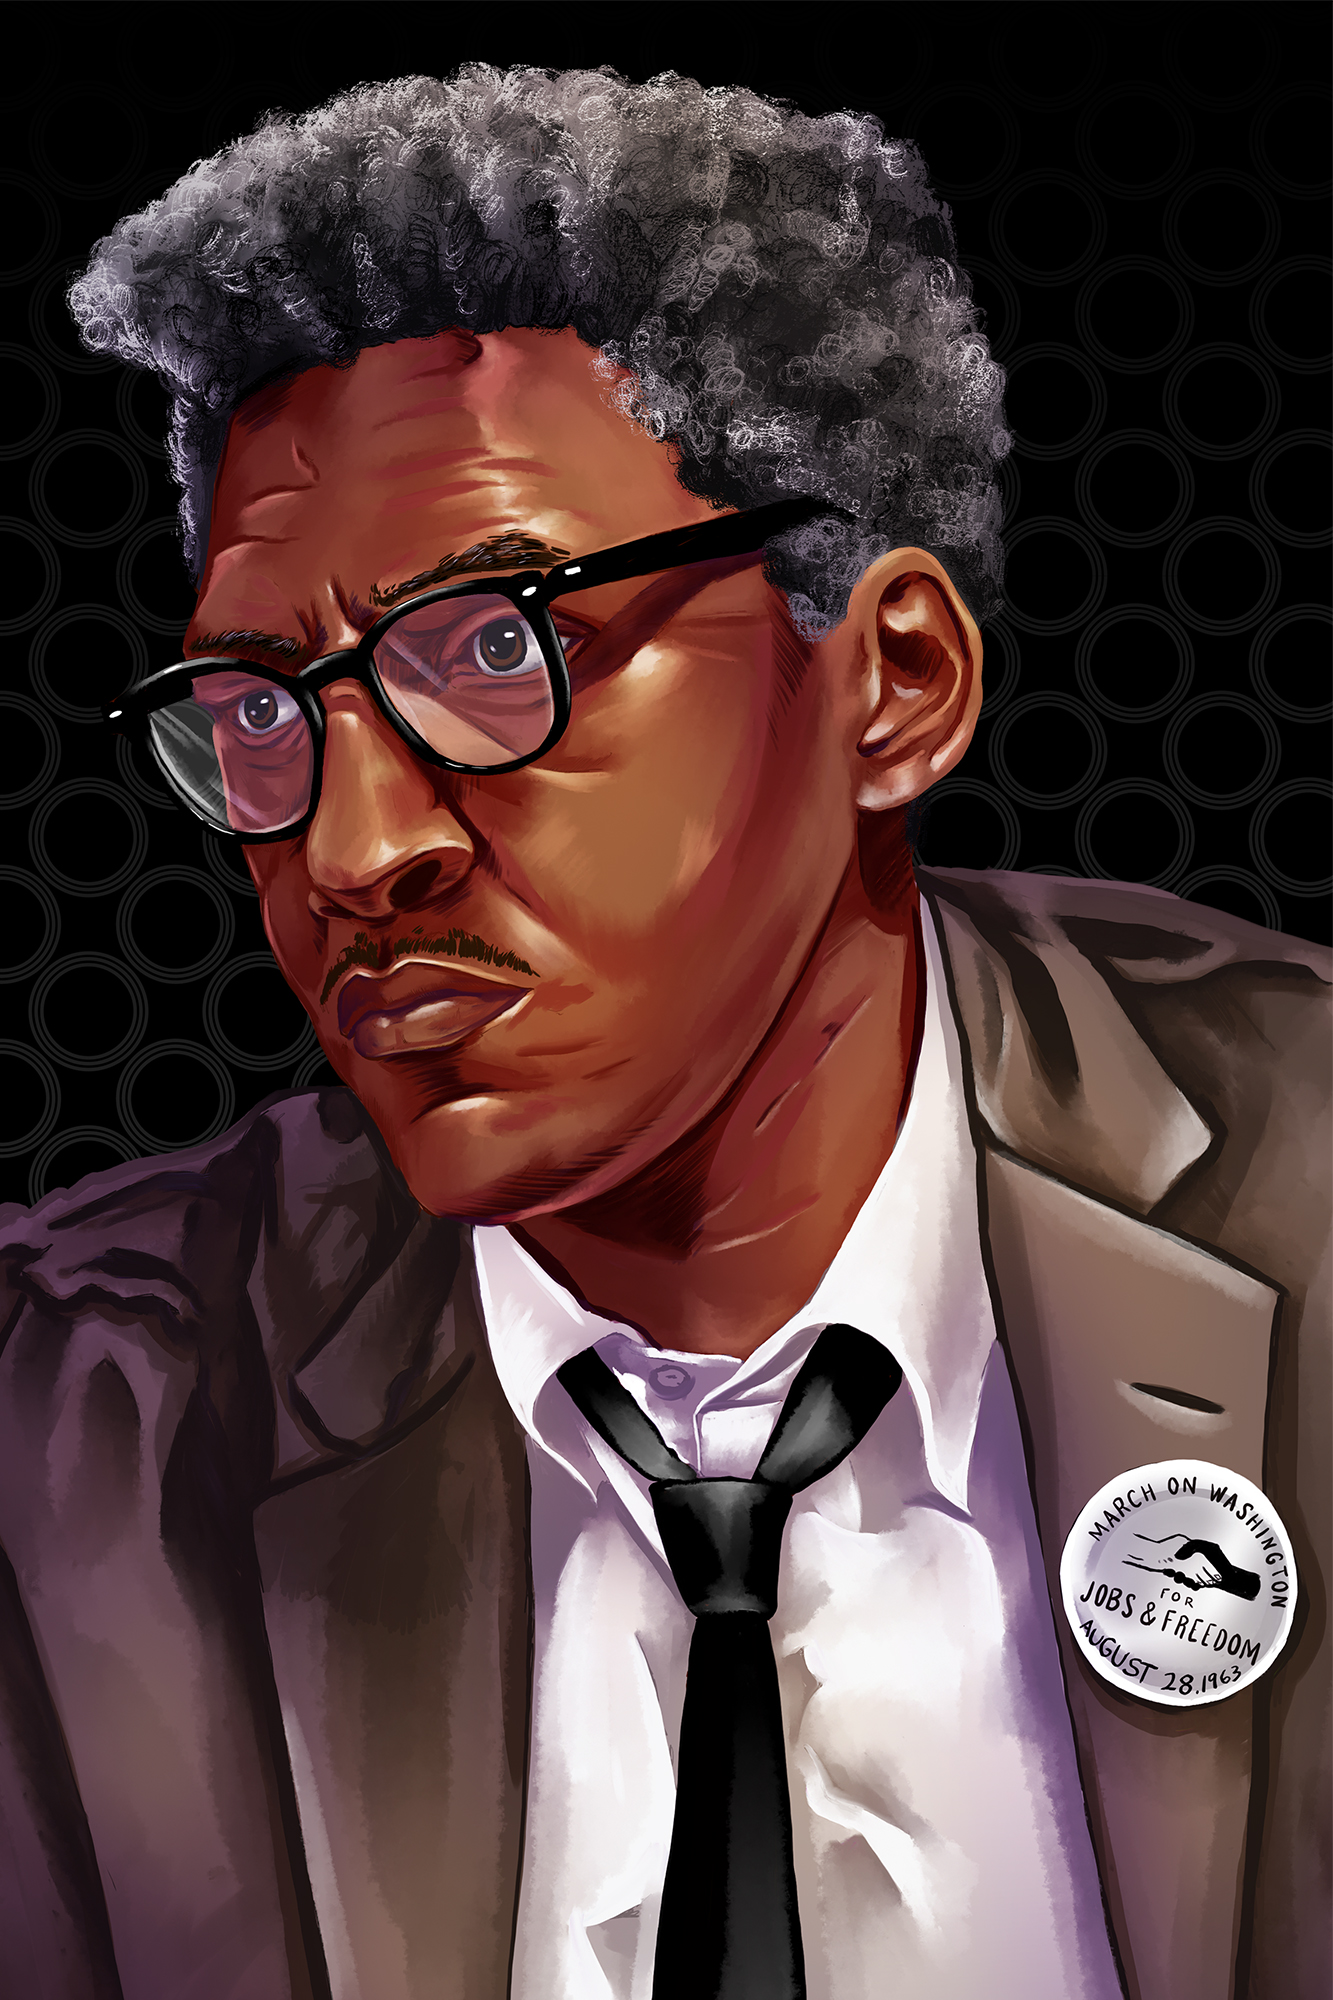 A painted portrait of Bayard Rustin, organizer of the March on Washington, painted by Sarah Black.